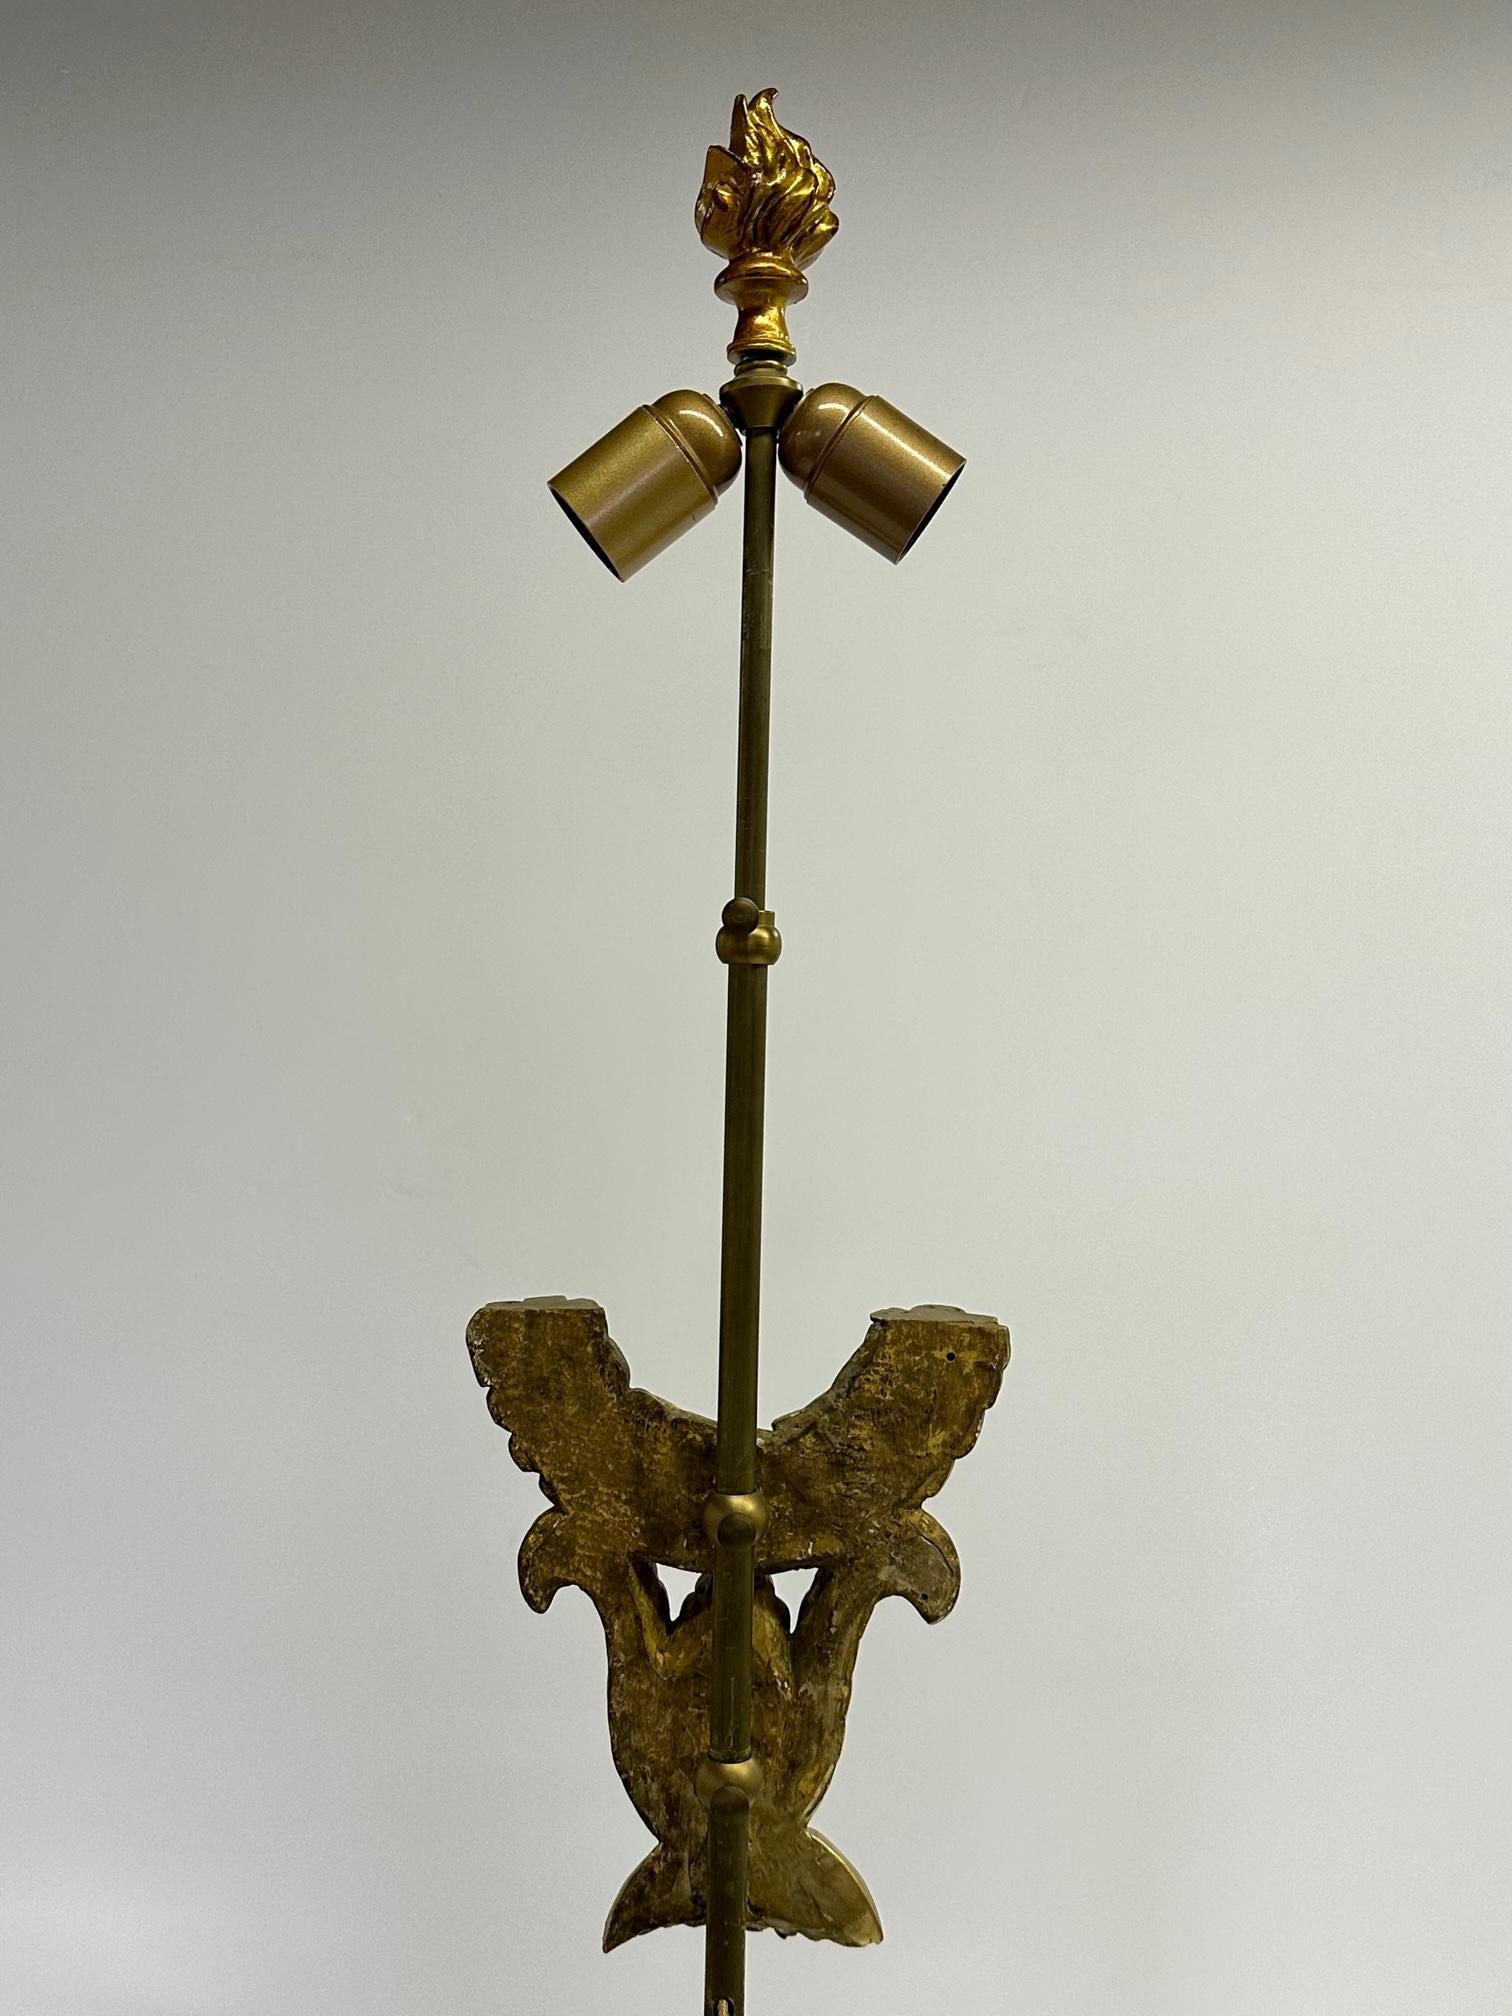 Brass One of a Kind Architectural French Lamp with Antique Elements